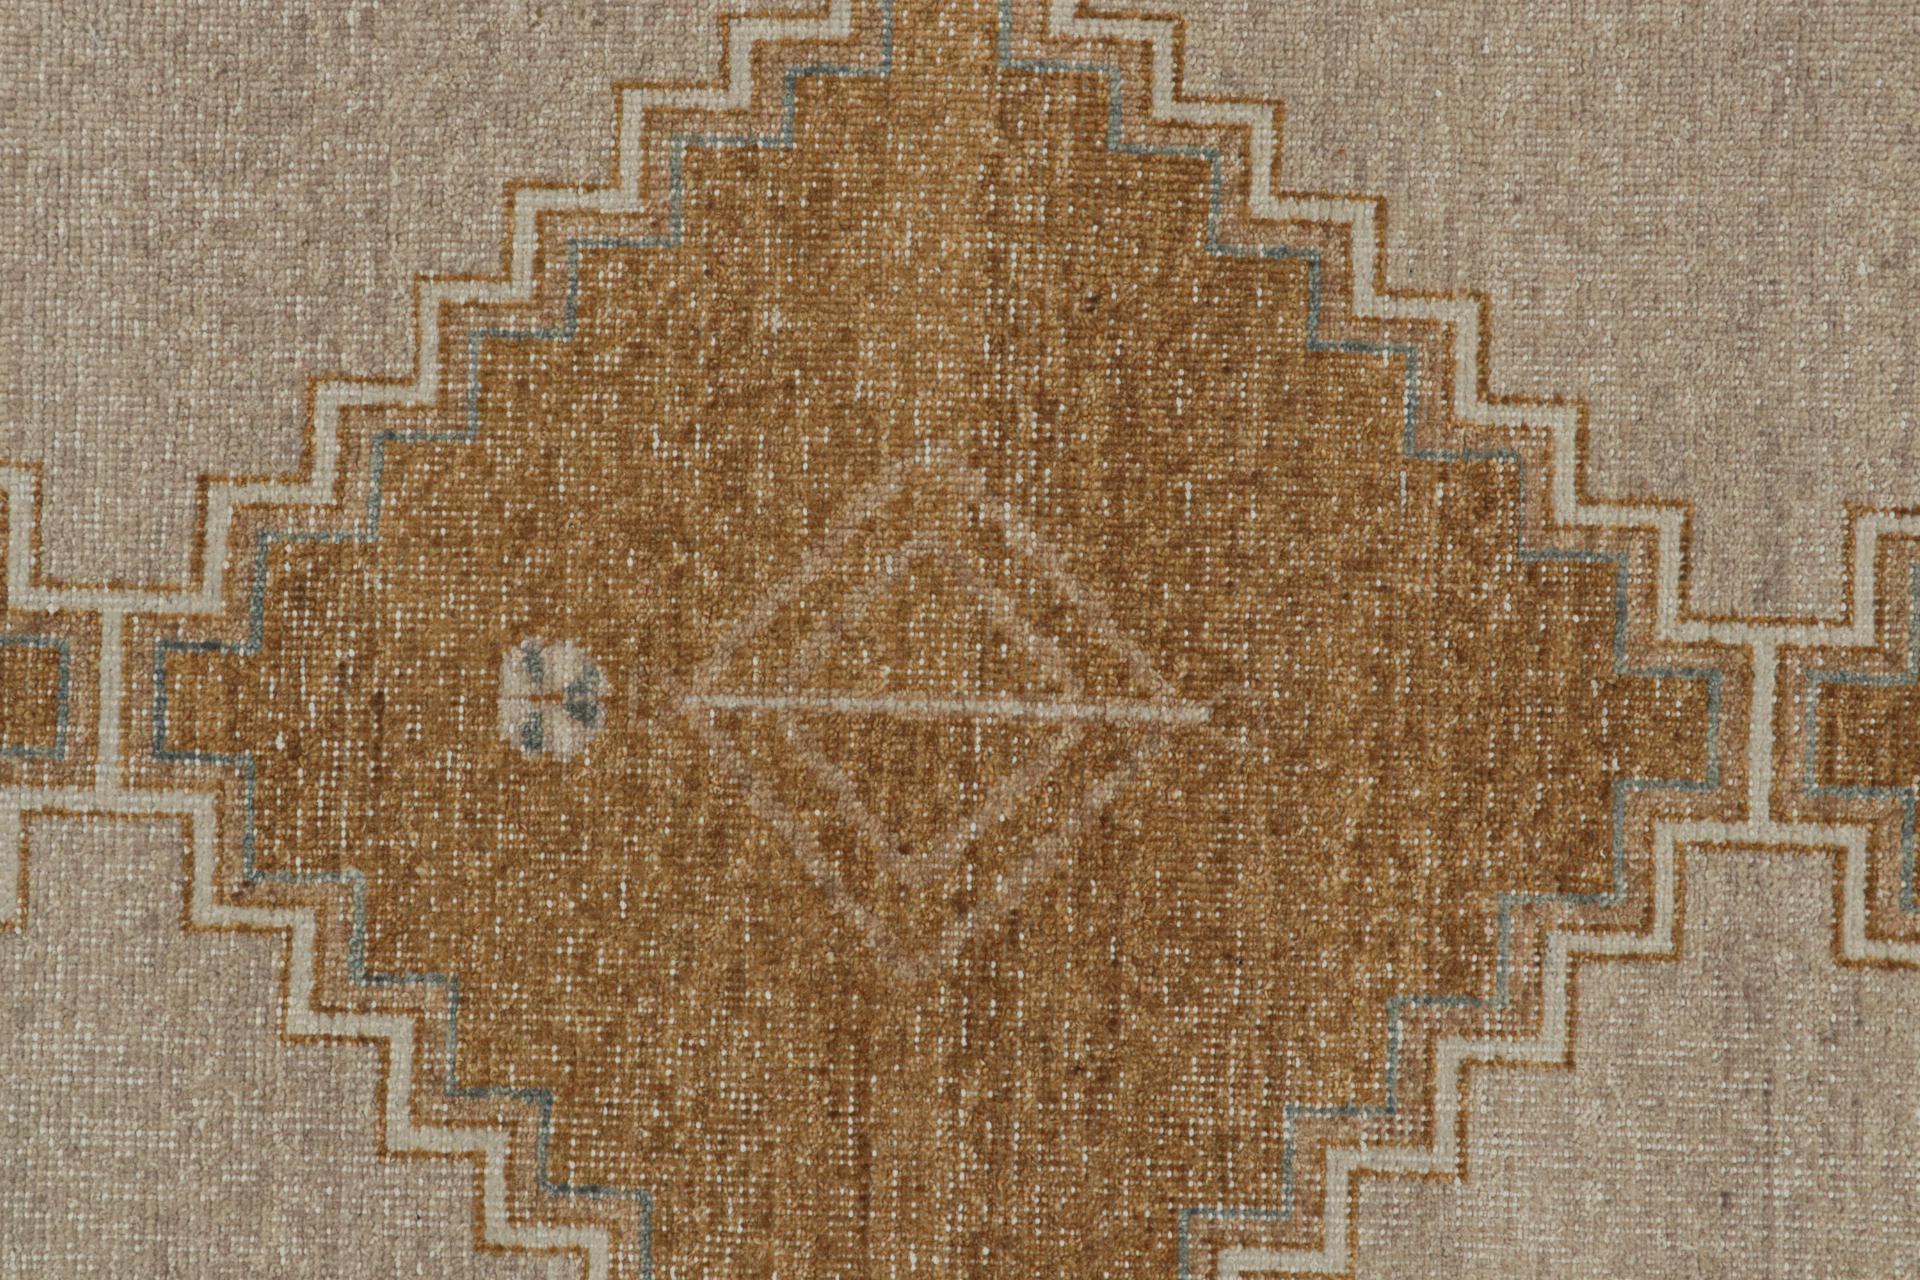 Contemporary Rug & Kilim’s Distressed Tribal Rug In Beige, Brown and Gold Patterns For Sale